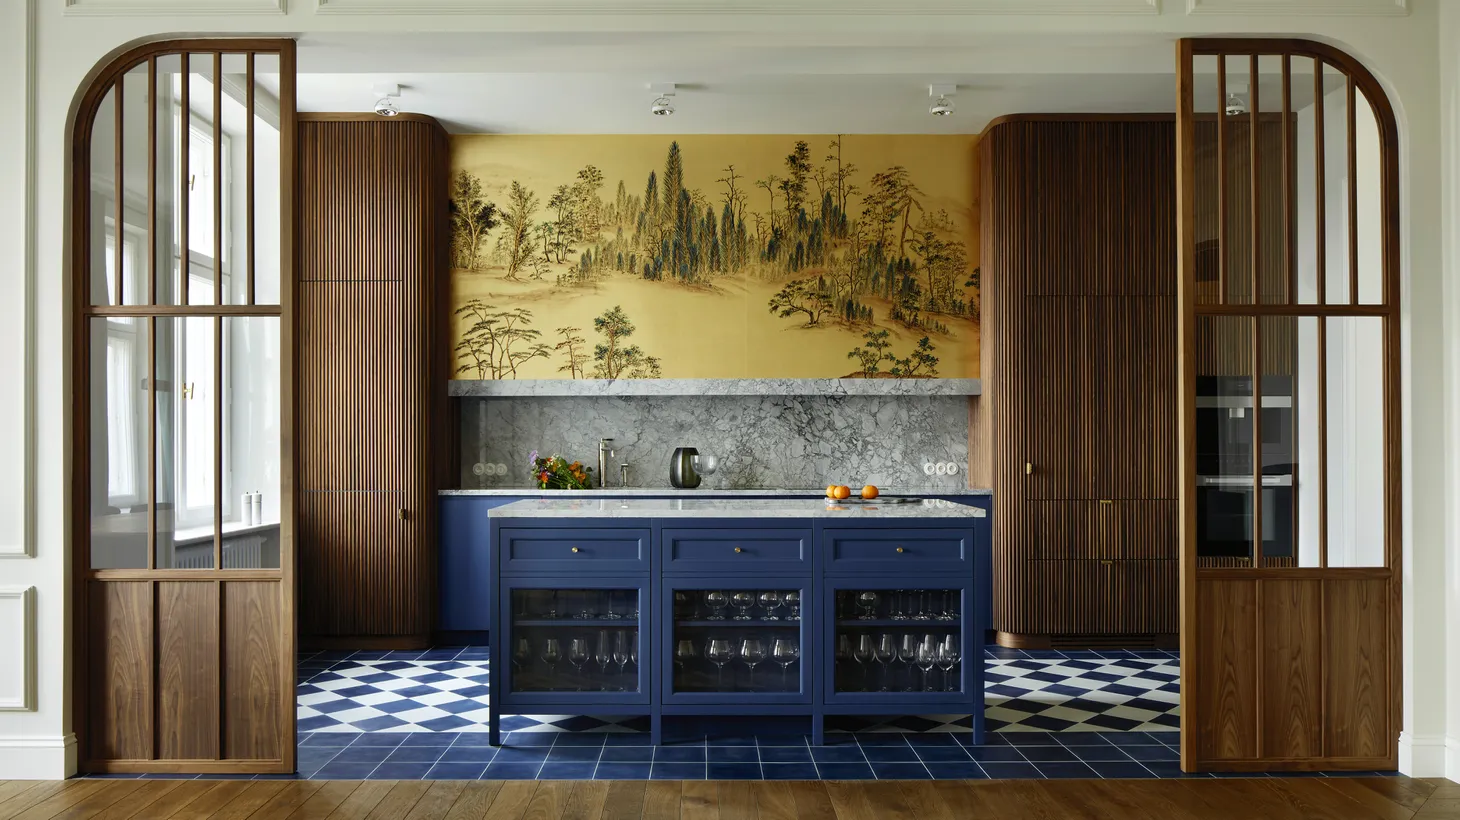 The art in this Warsaw kitchen is an oversized hand-painted wallpaper panel.